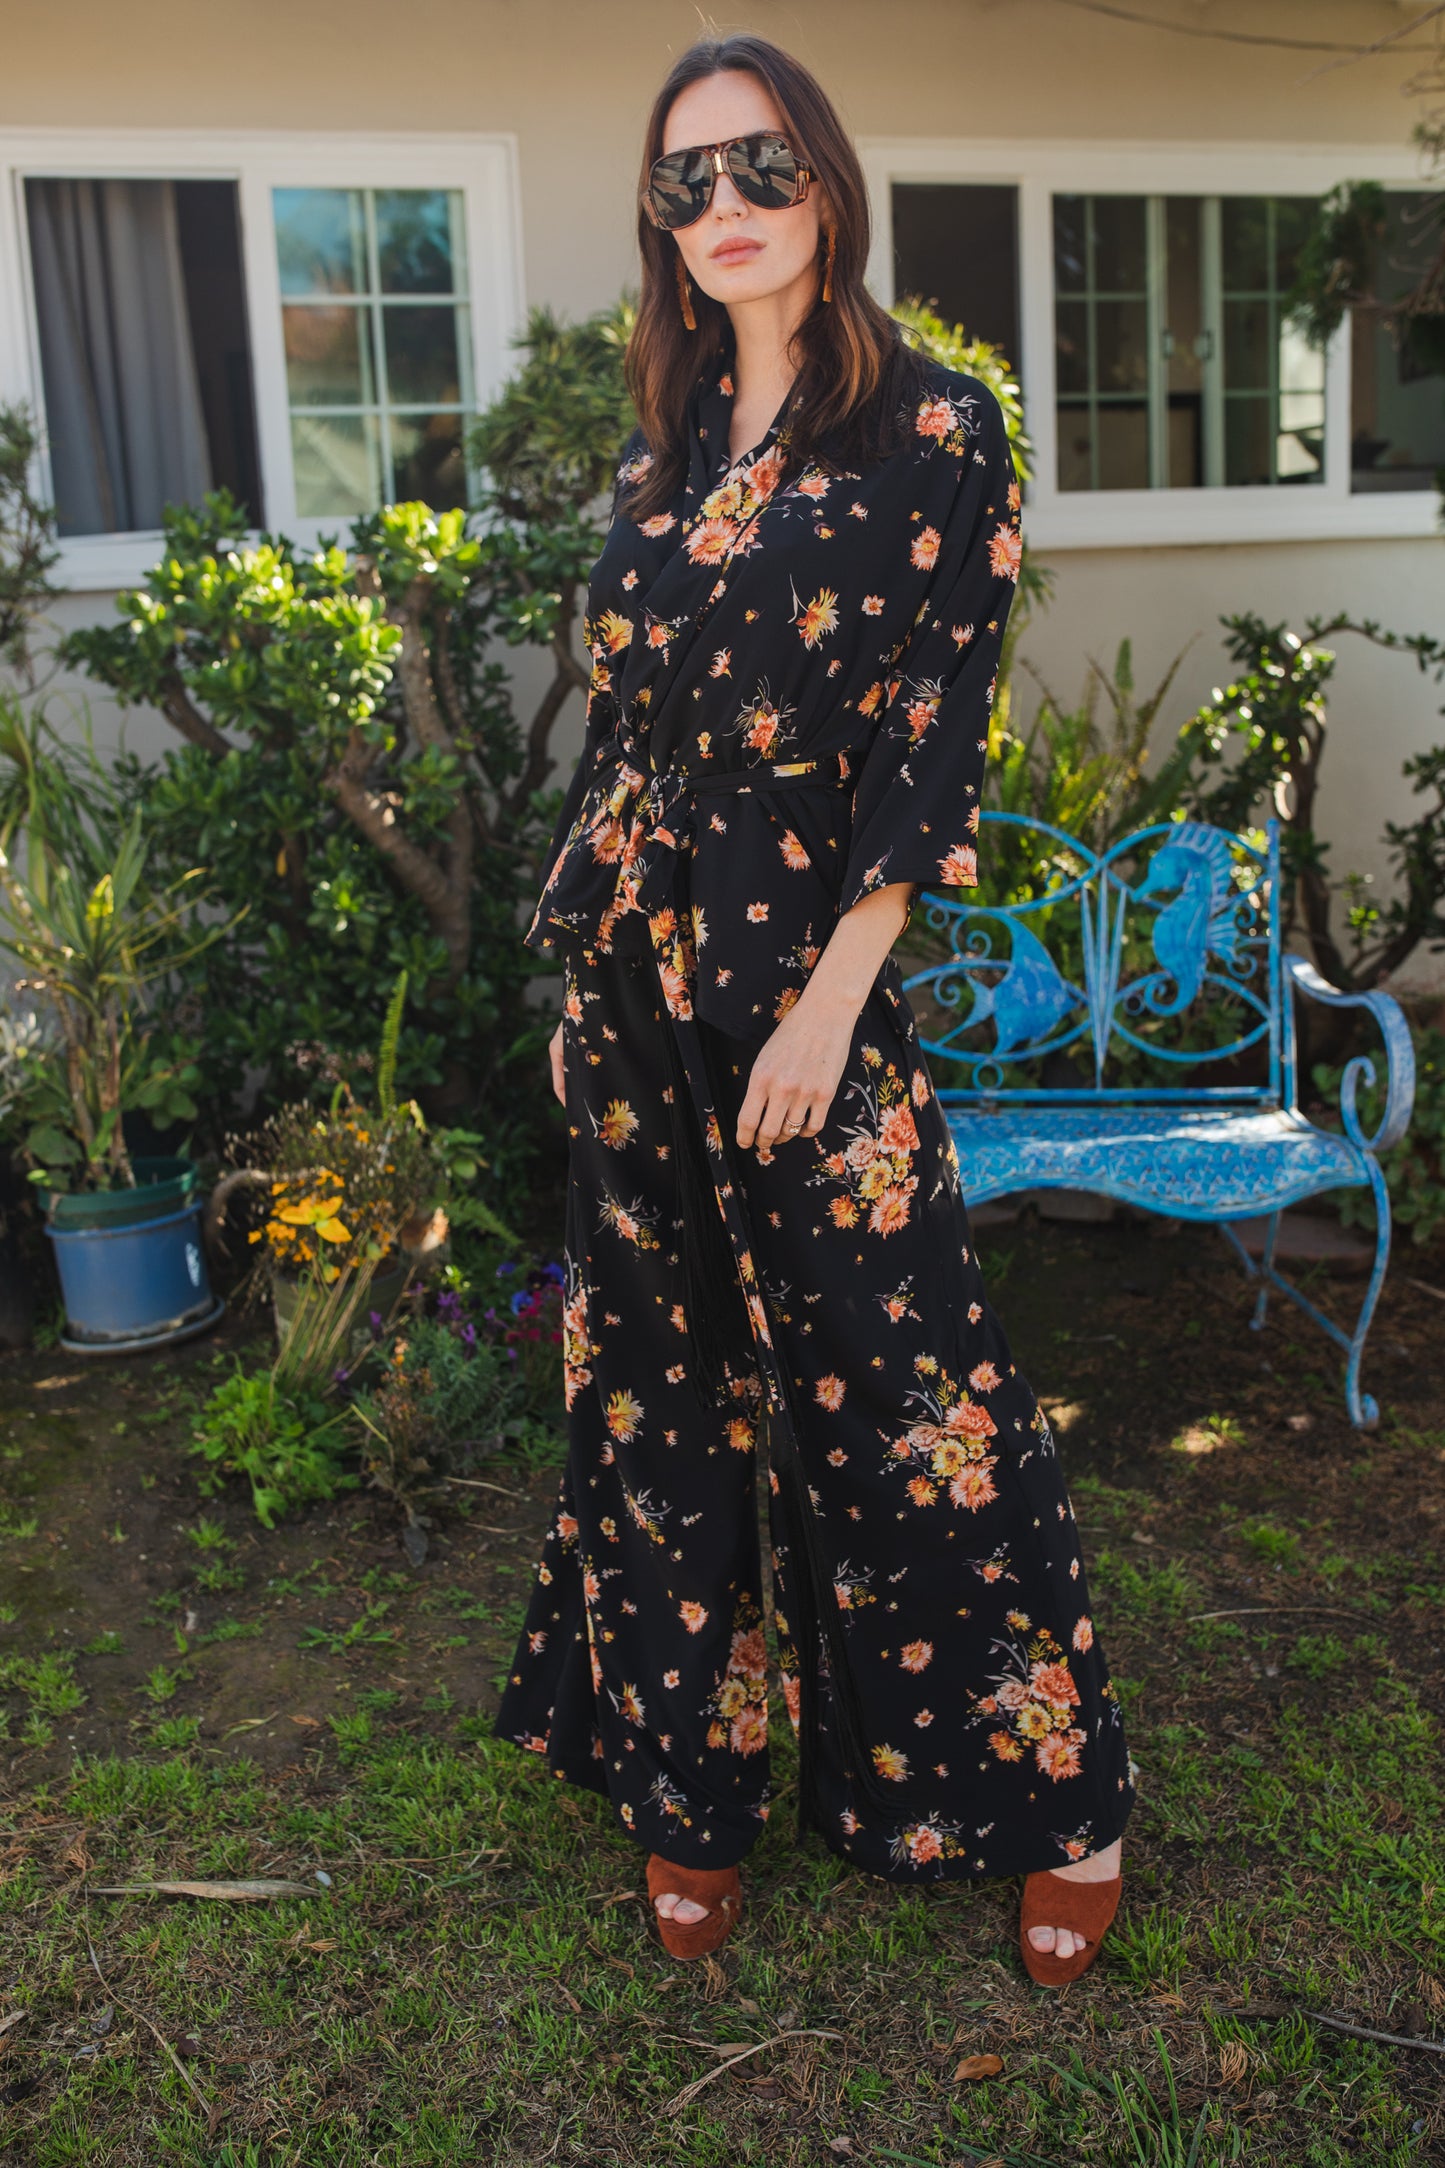 jennafer grace Briar dolman palazzo set silky black georgette with vibrant yellow pink floral print matching co-ord coord set wrap blouse top with tasseled belt and palazzo pant with pockets and elastic waist boho bohemian hippie romantic whimsical glamorous pajamas pjs glam lounge wear handmade in california usa